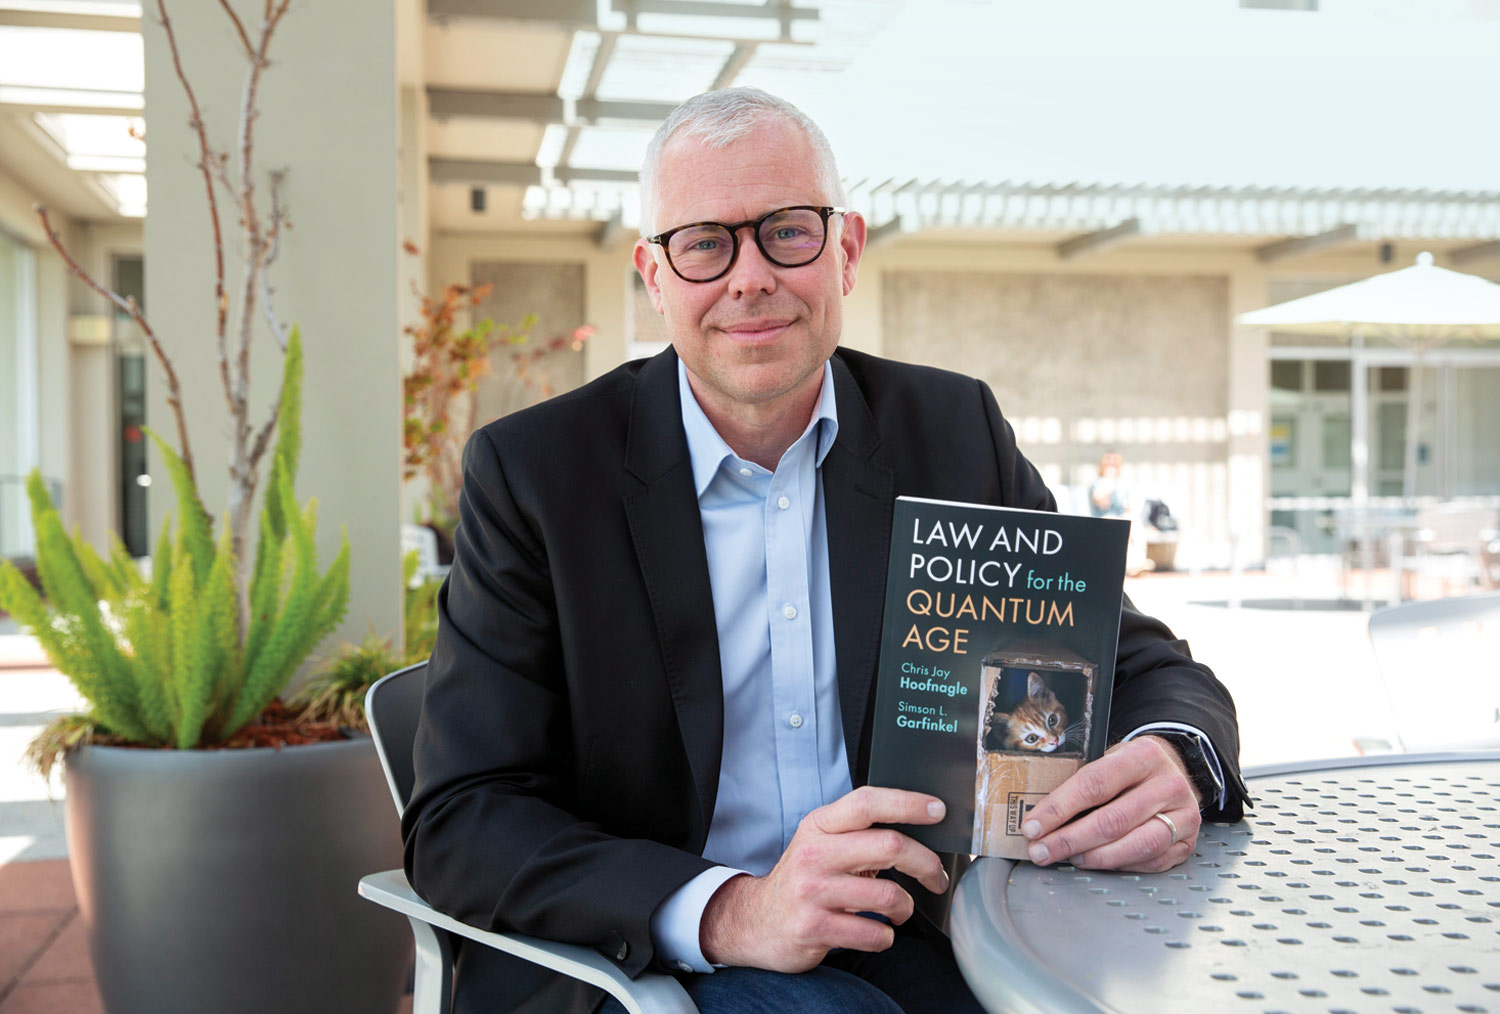 Professor Chris Hoofnagle seated at an outdoor table holding his latest book